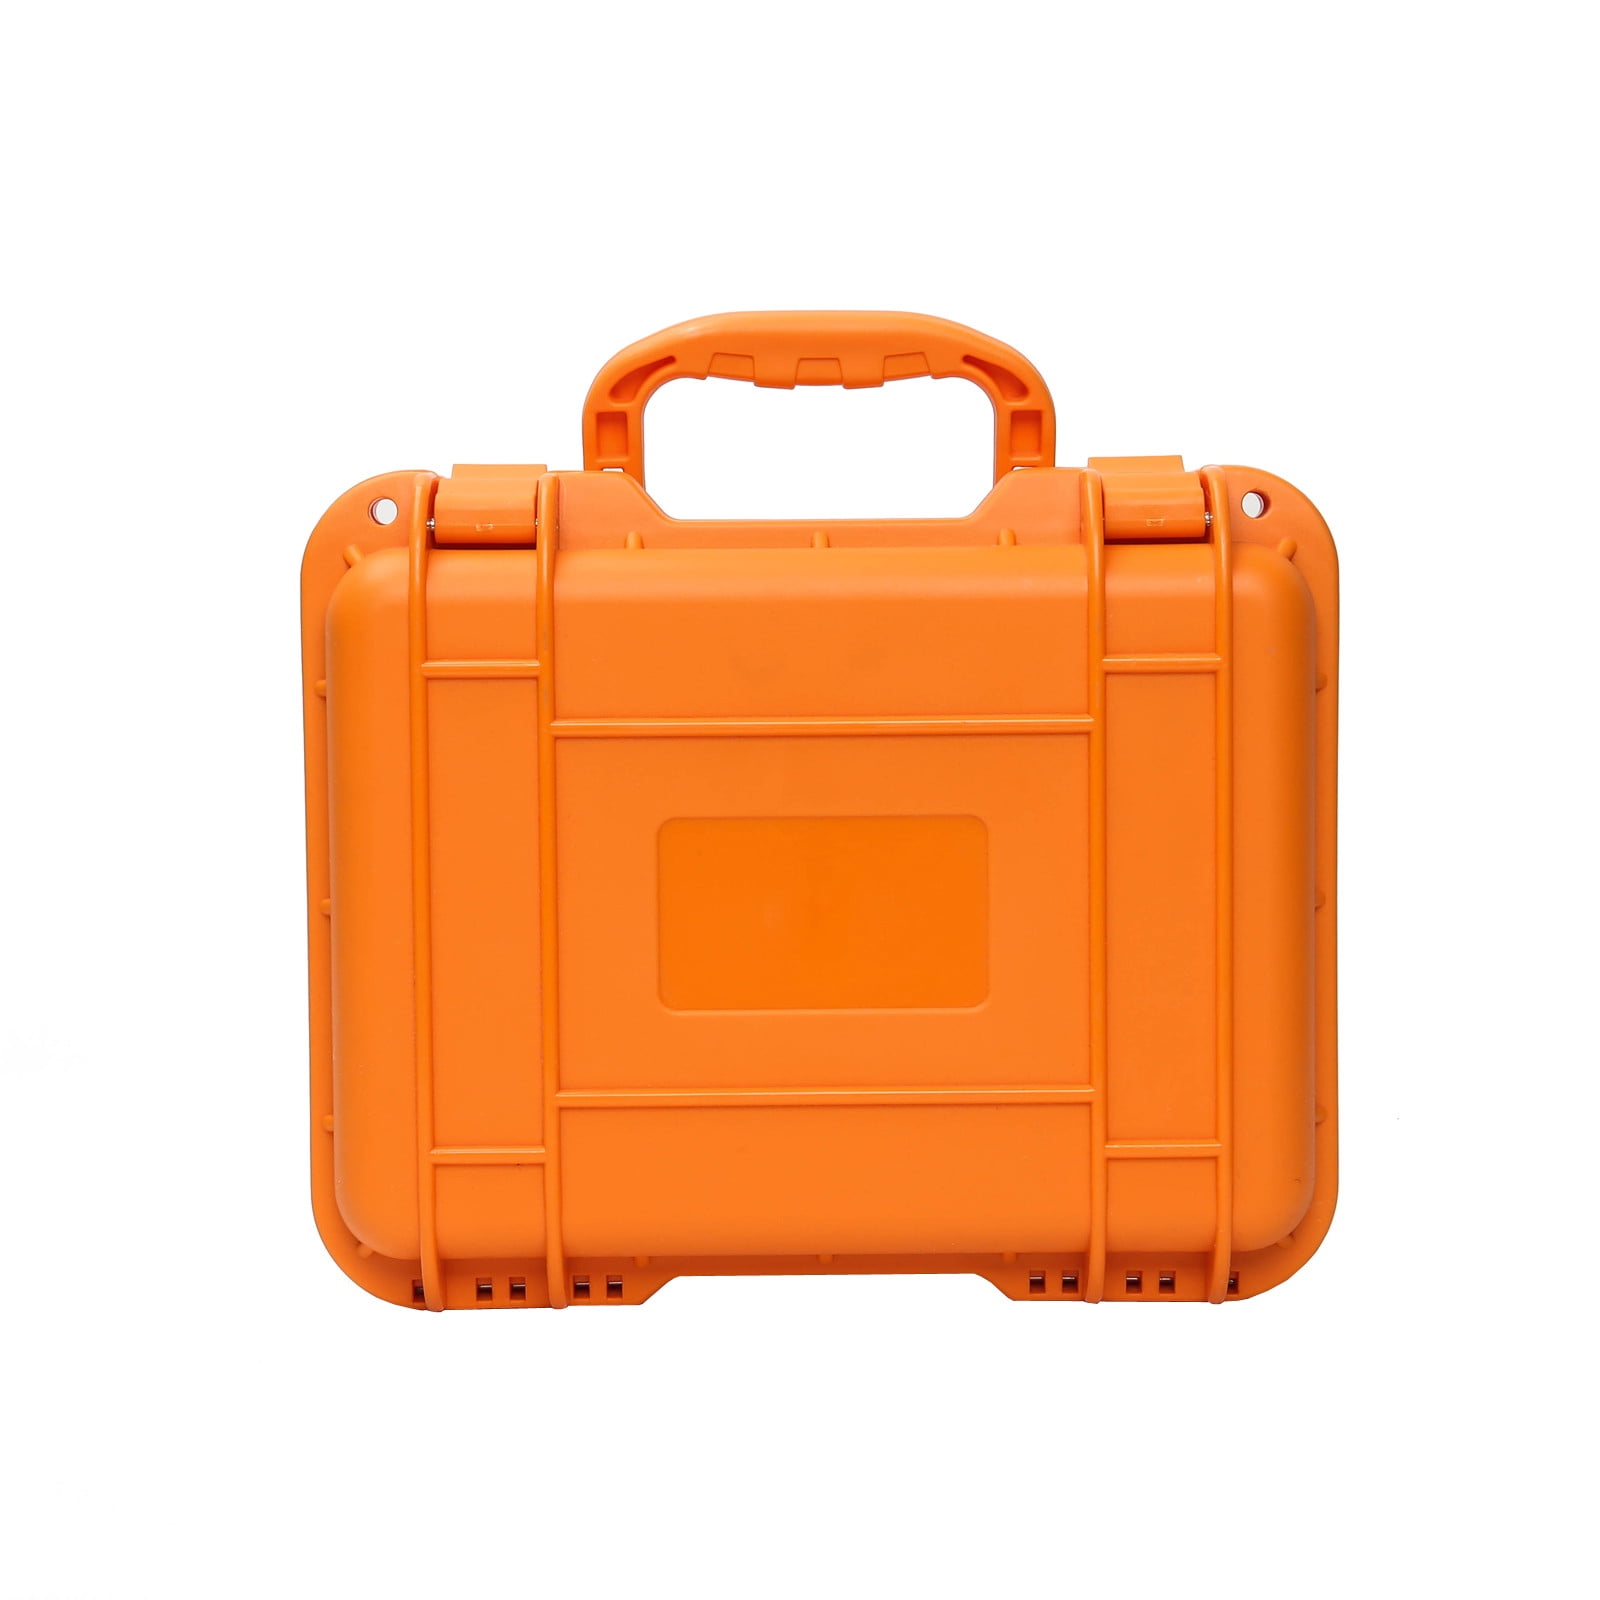 coolwild Drone Carry Case Waterproof Hard Case Storage Bag Box Suitcase Mavic Mini Aerial Drone 3 Battery Storage Box Accessories 